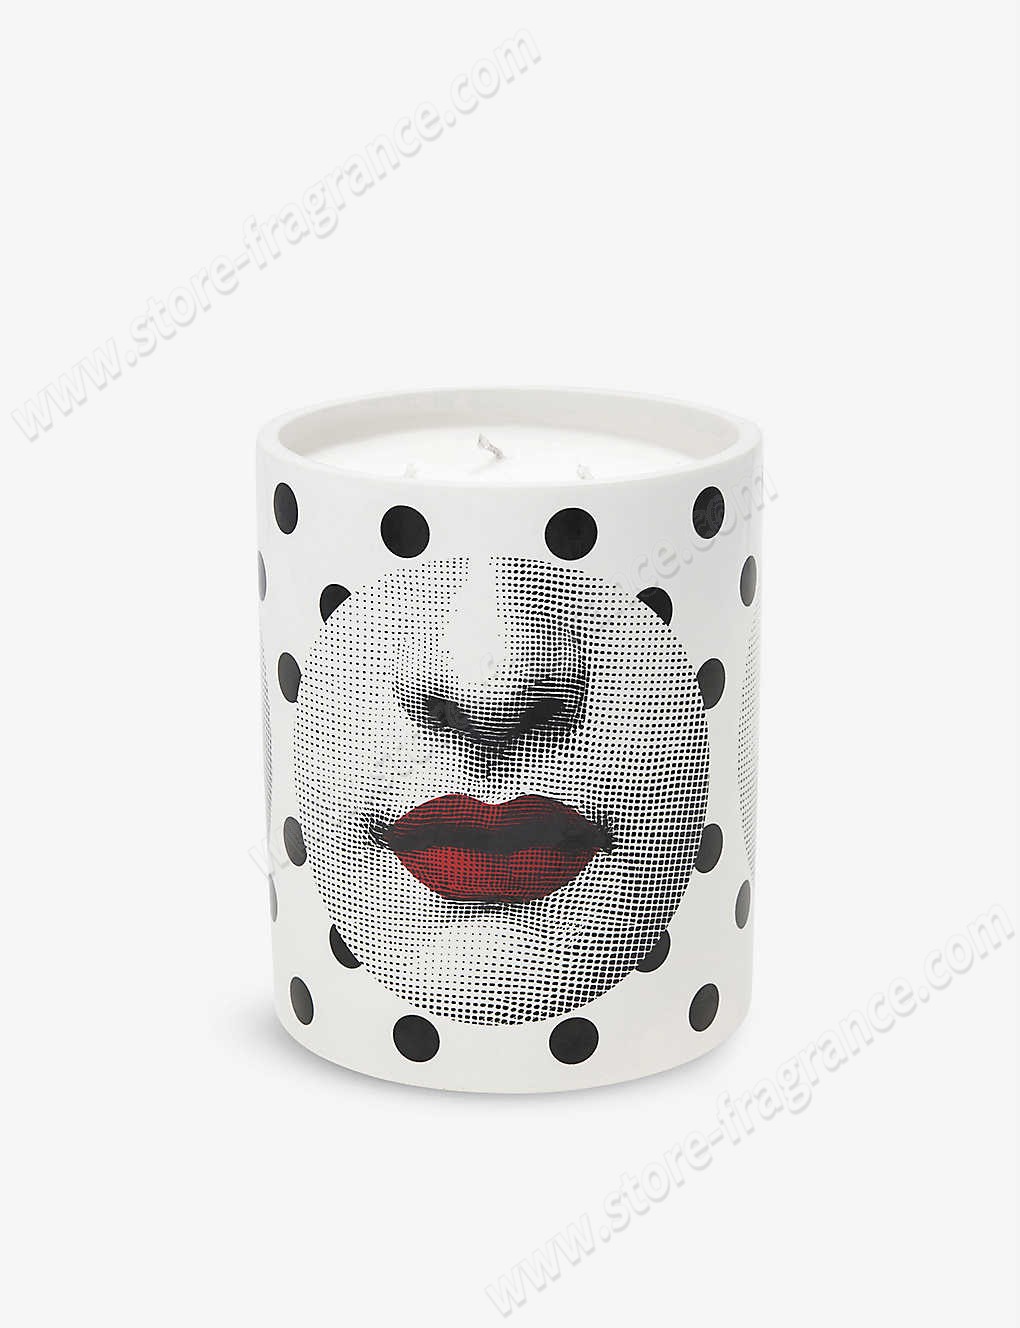 FORNASETTI/Fornasetti x Comme des Garçons Comme des Forna scented candle 900g ✿ Discount Store - FORNASETTI/Fornasetti x Comme des Garçons Comme des Forna scented candle 900g ✿ Discount Store